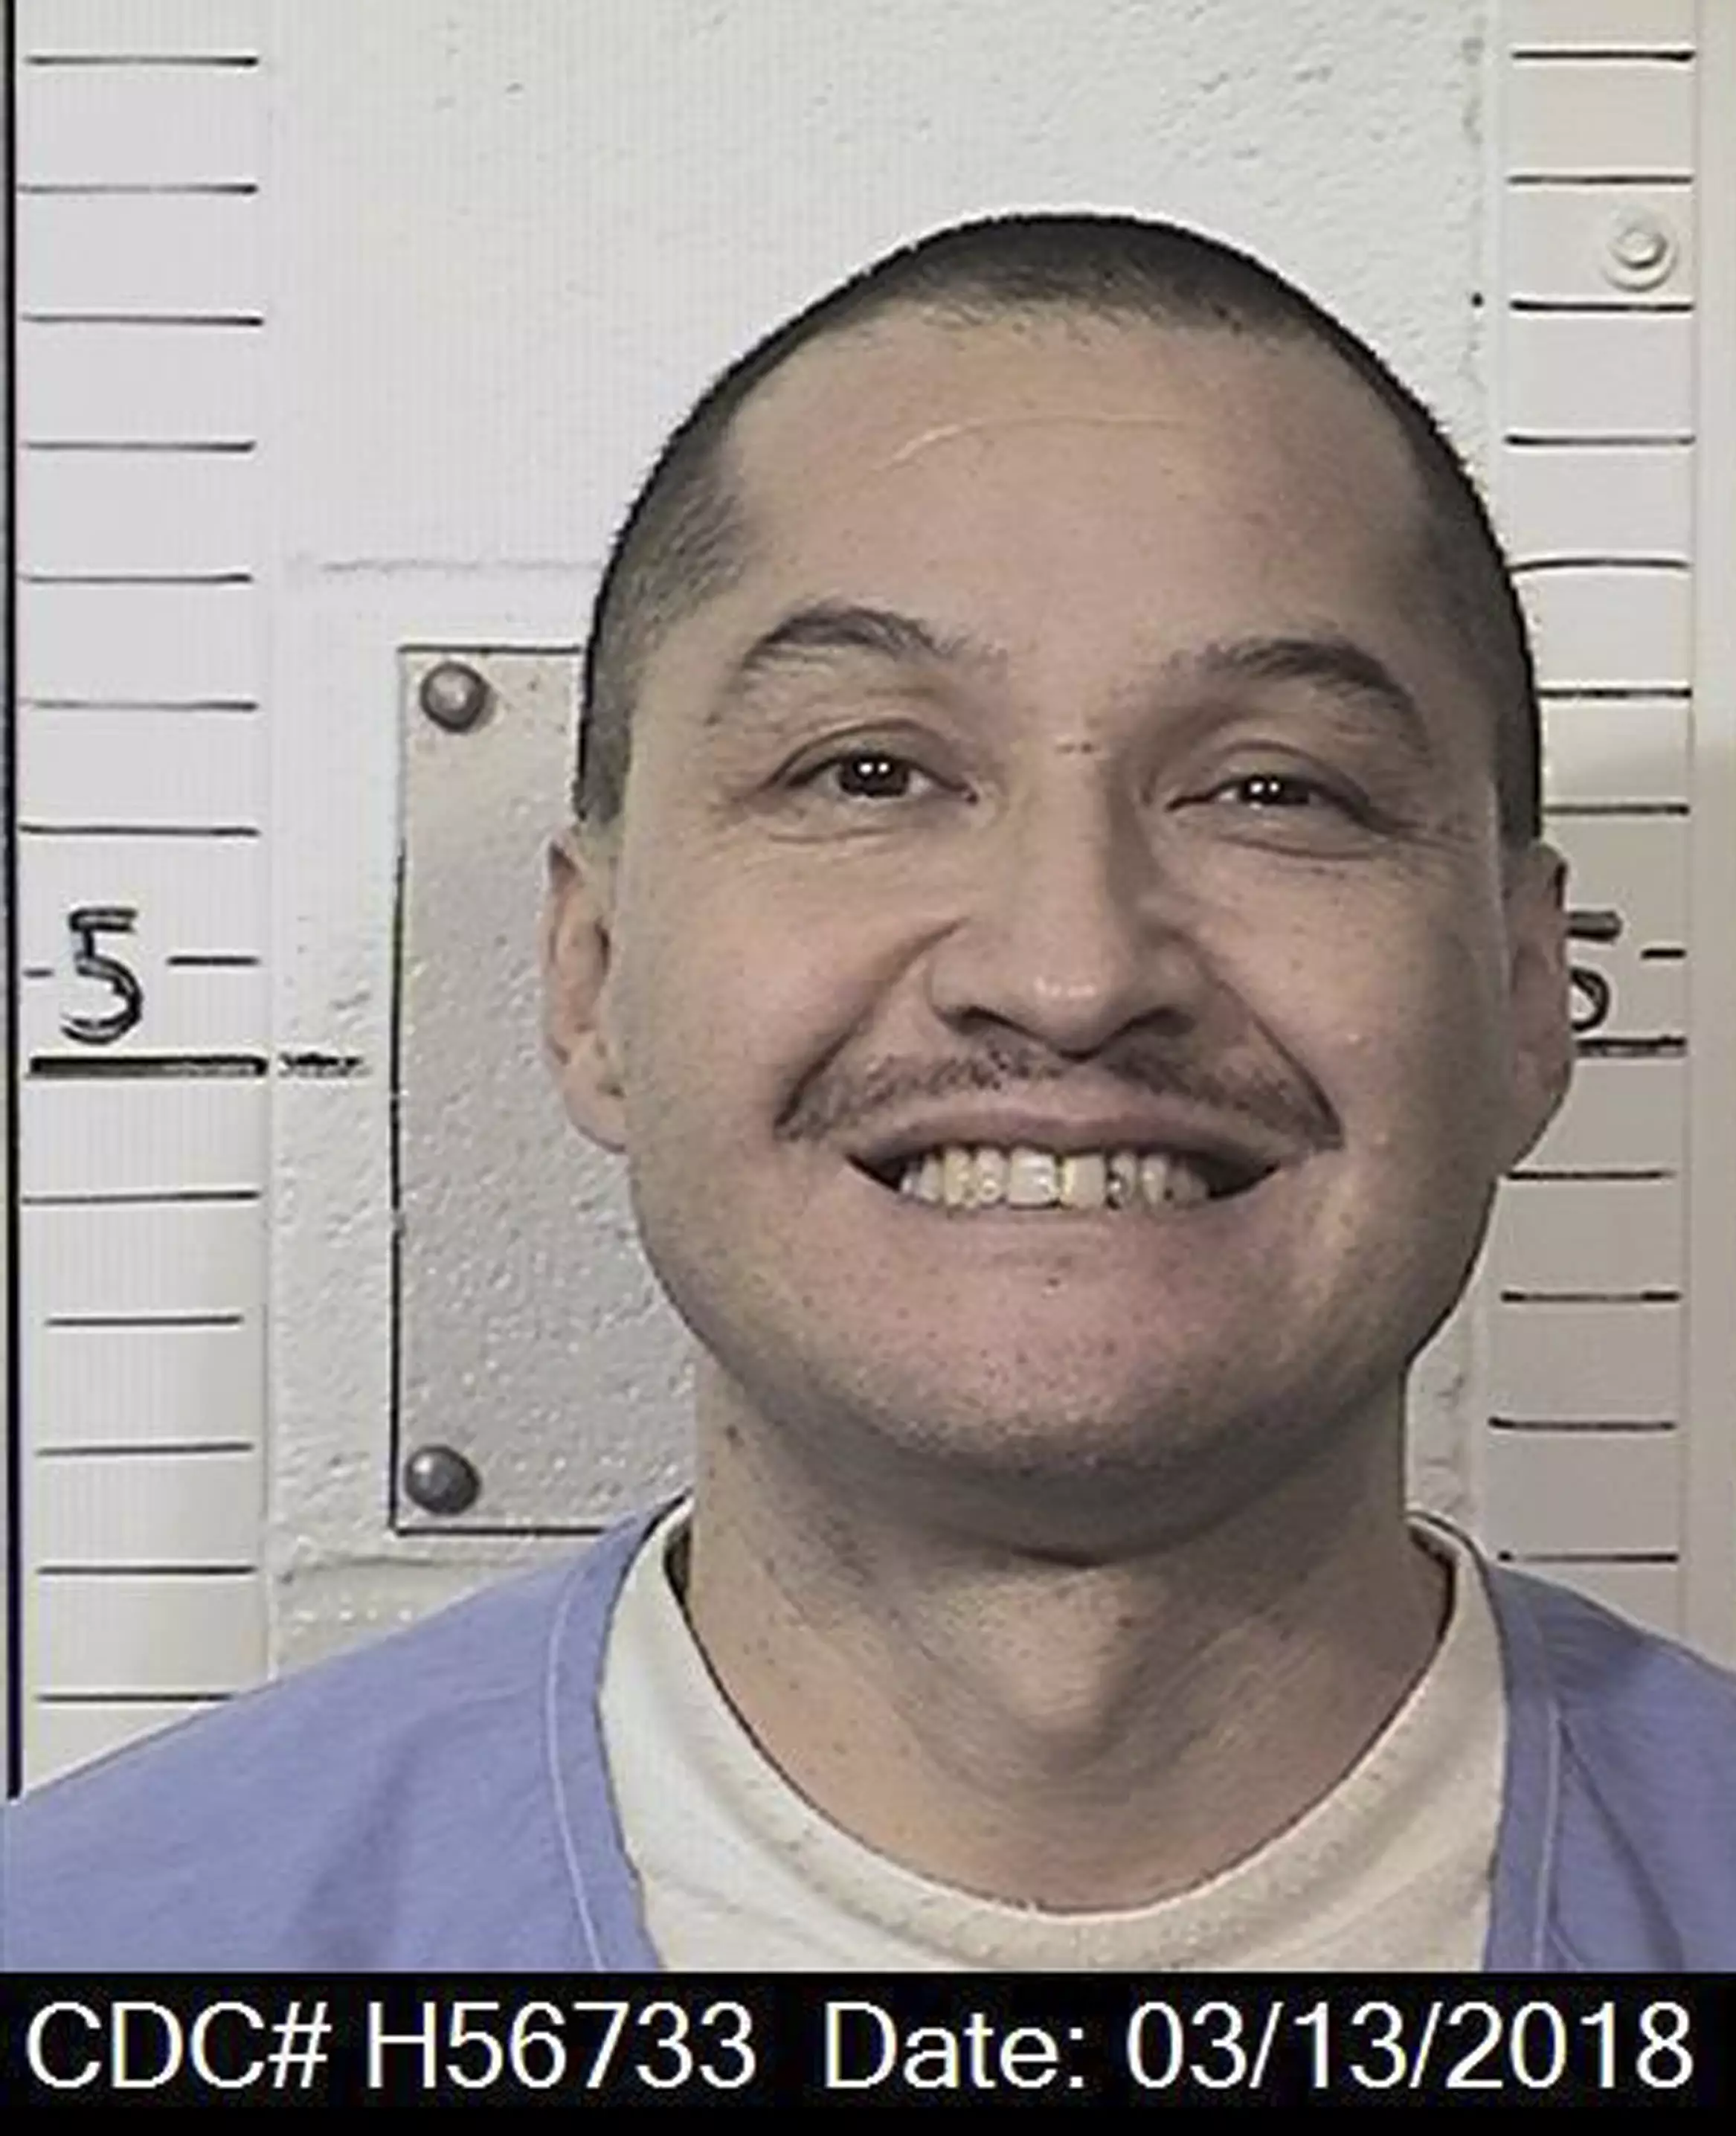 Luis Romero was found in his cell by prison guards.